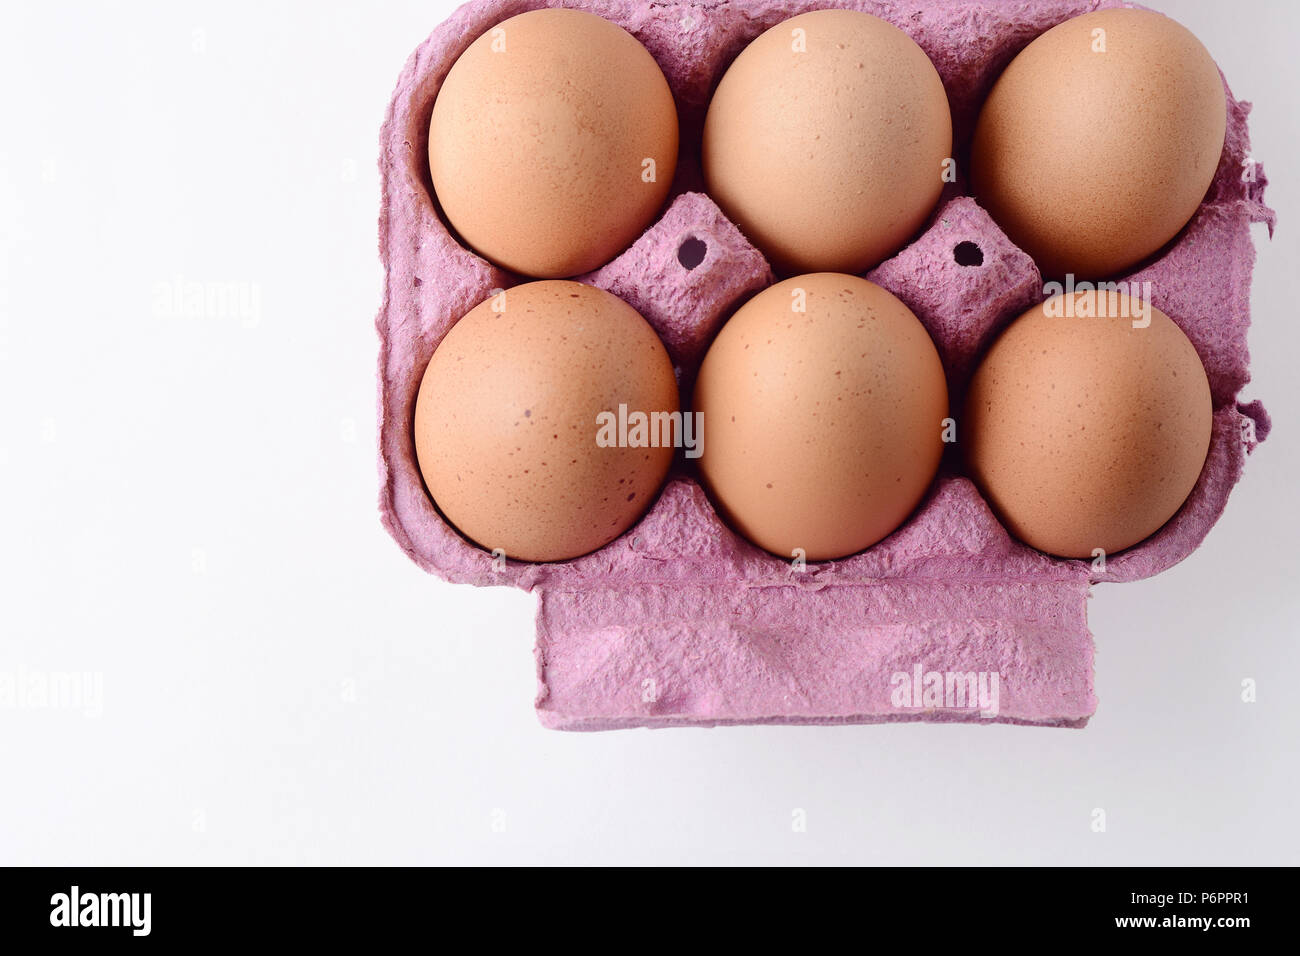 Top view of six brown eggs on box. Fresh food concept. White background Stock Photo